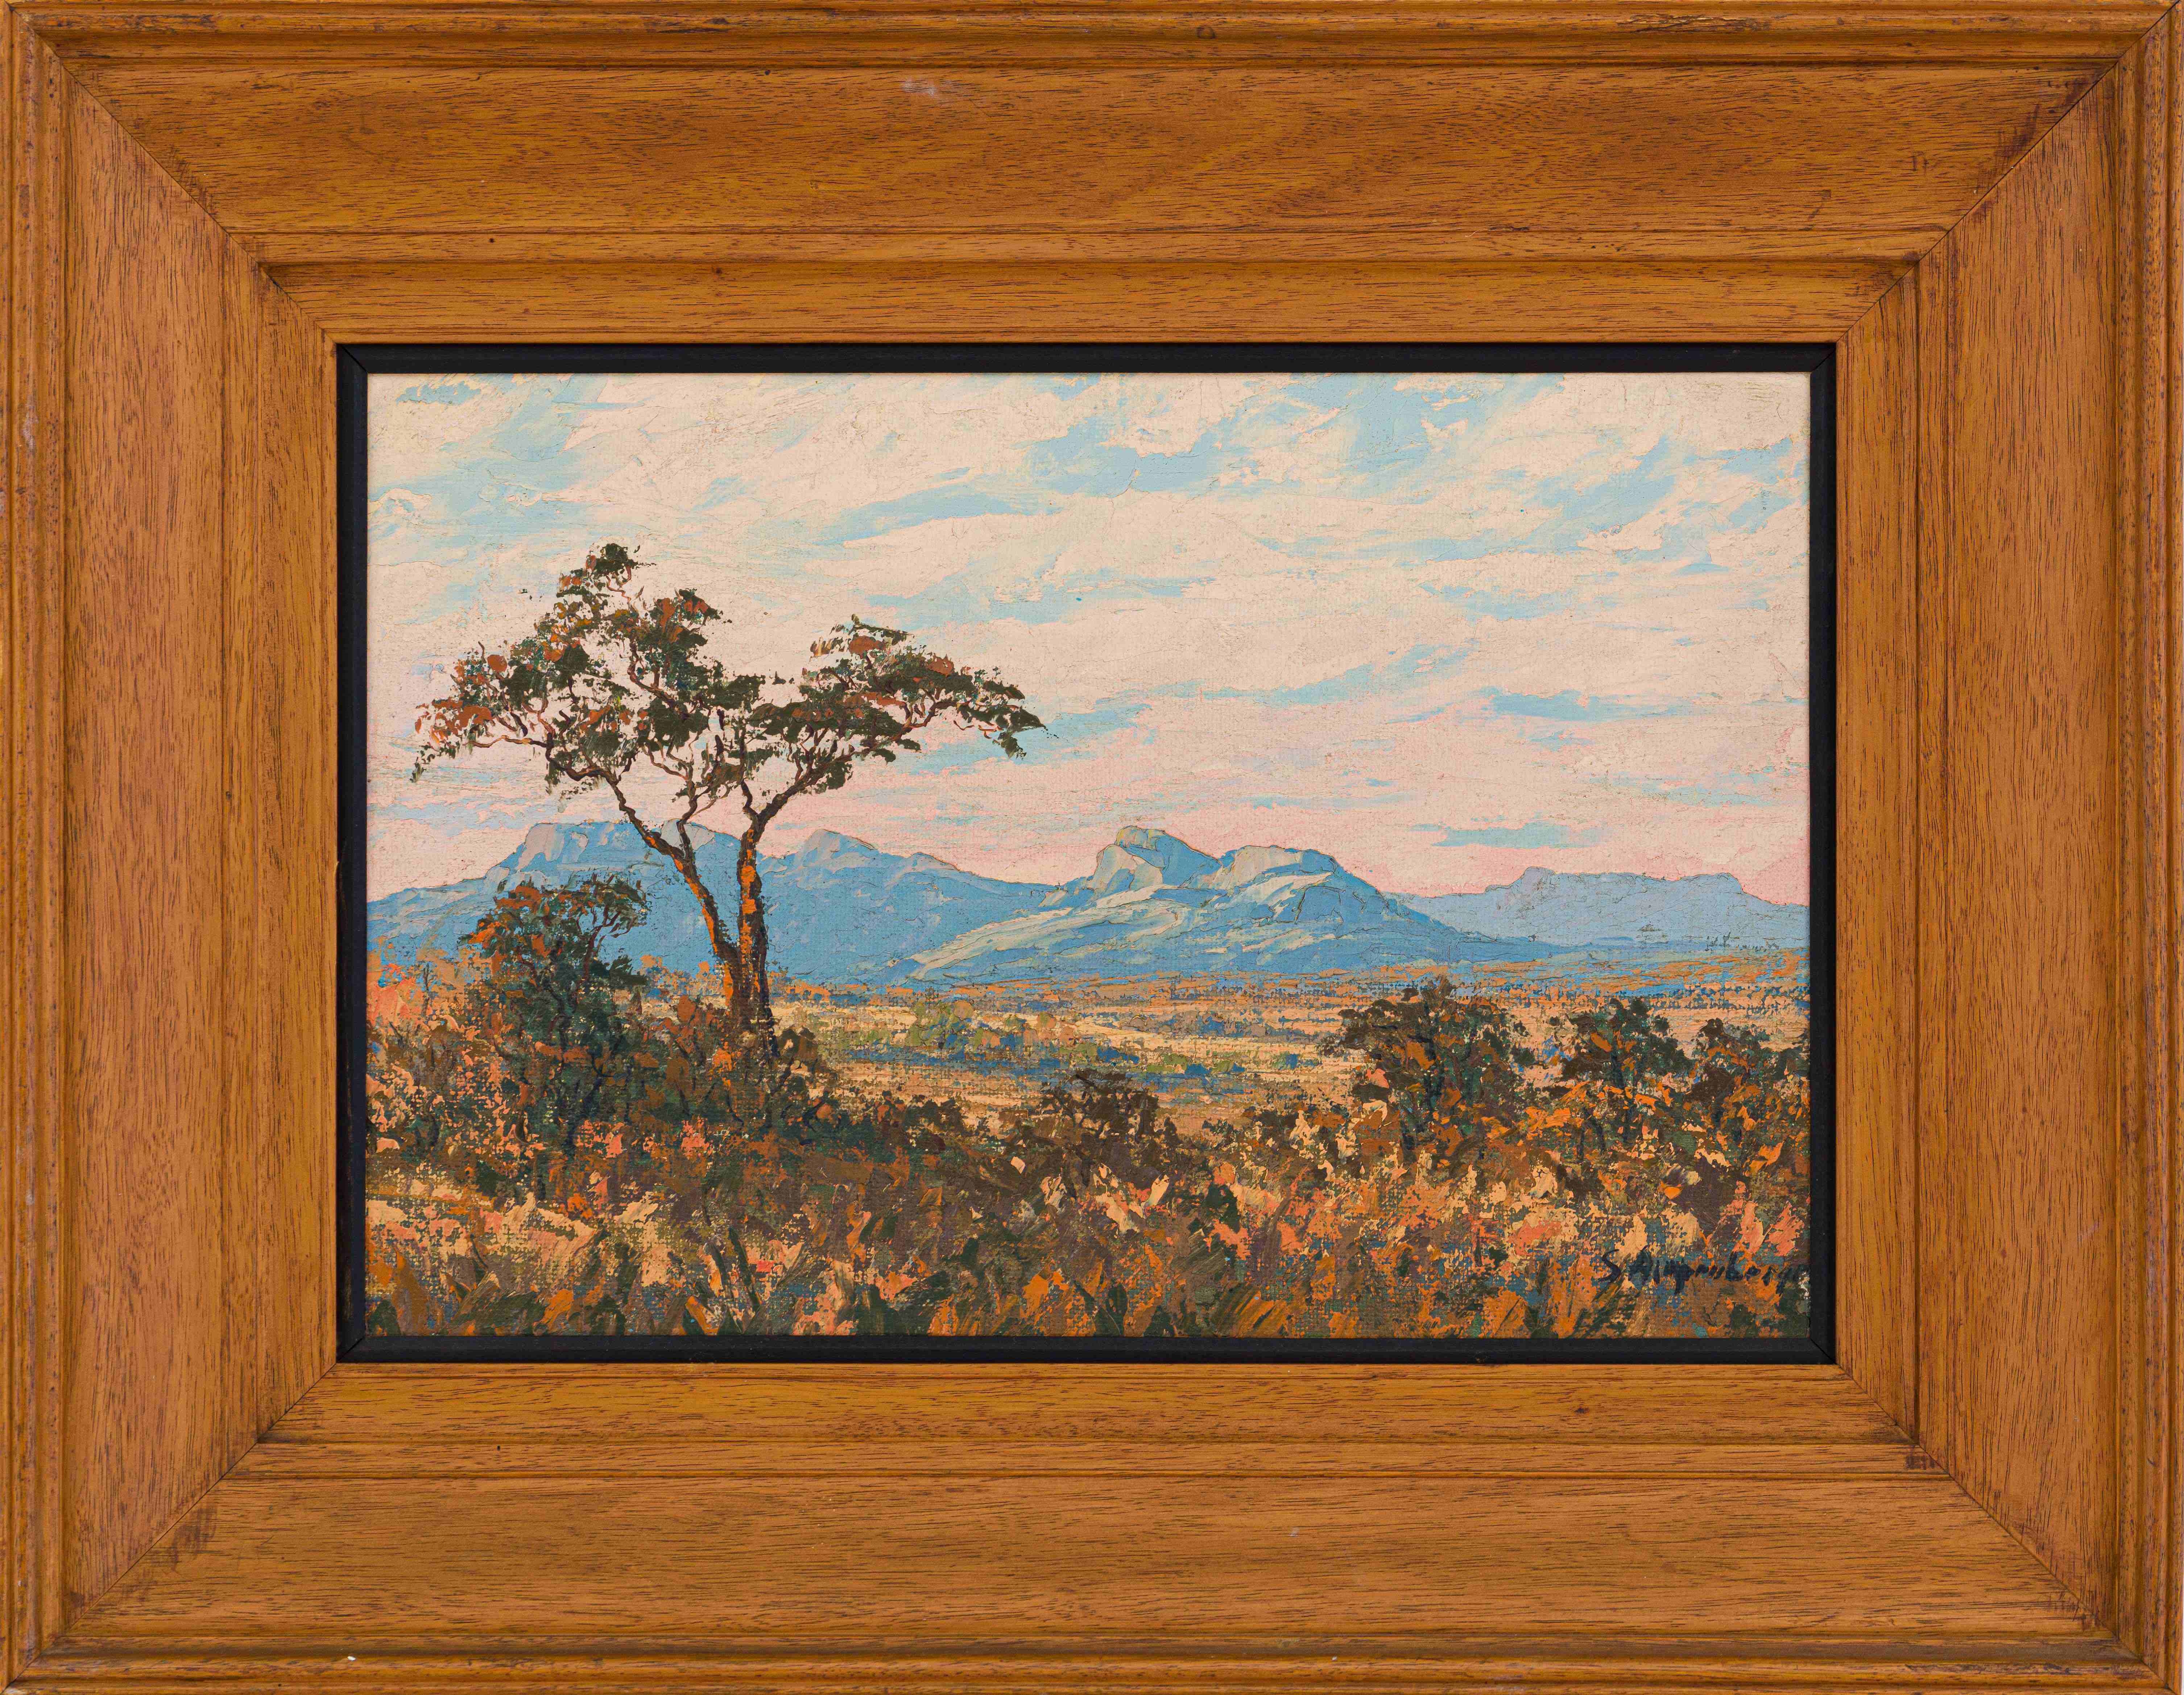 Artwork by Stefan Ampenberger, Landscape with Distant Mountains, Made of oil on canvas